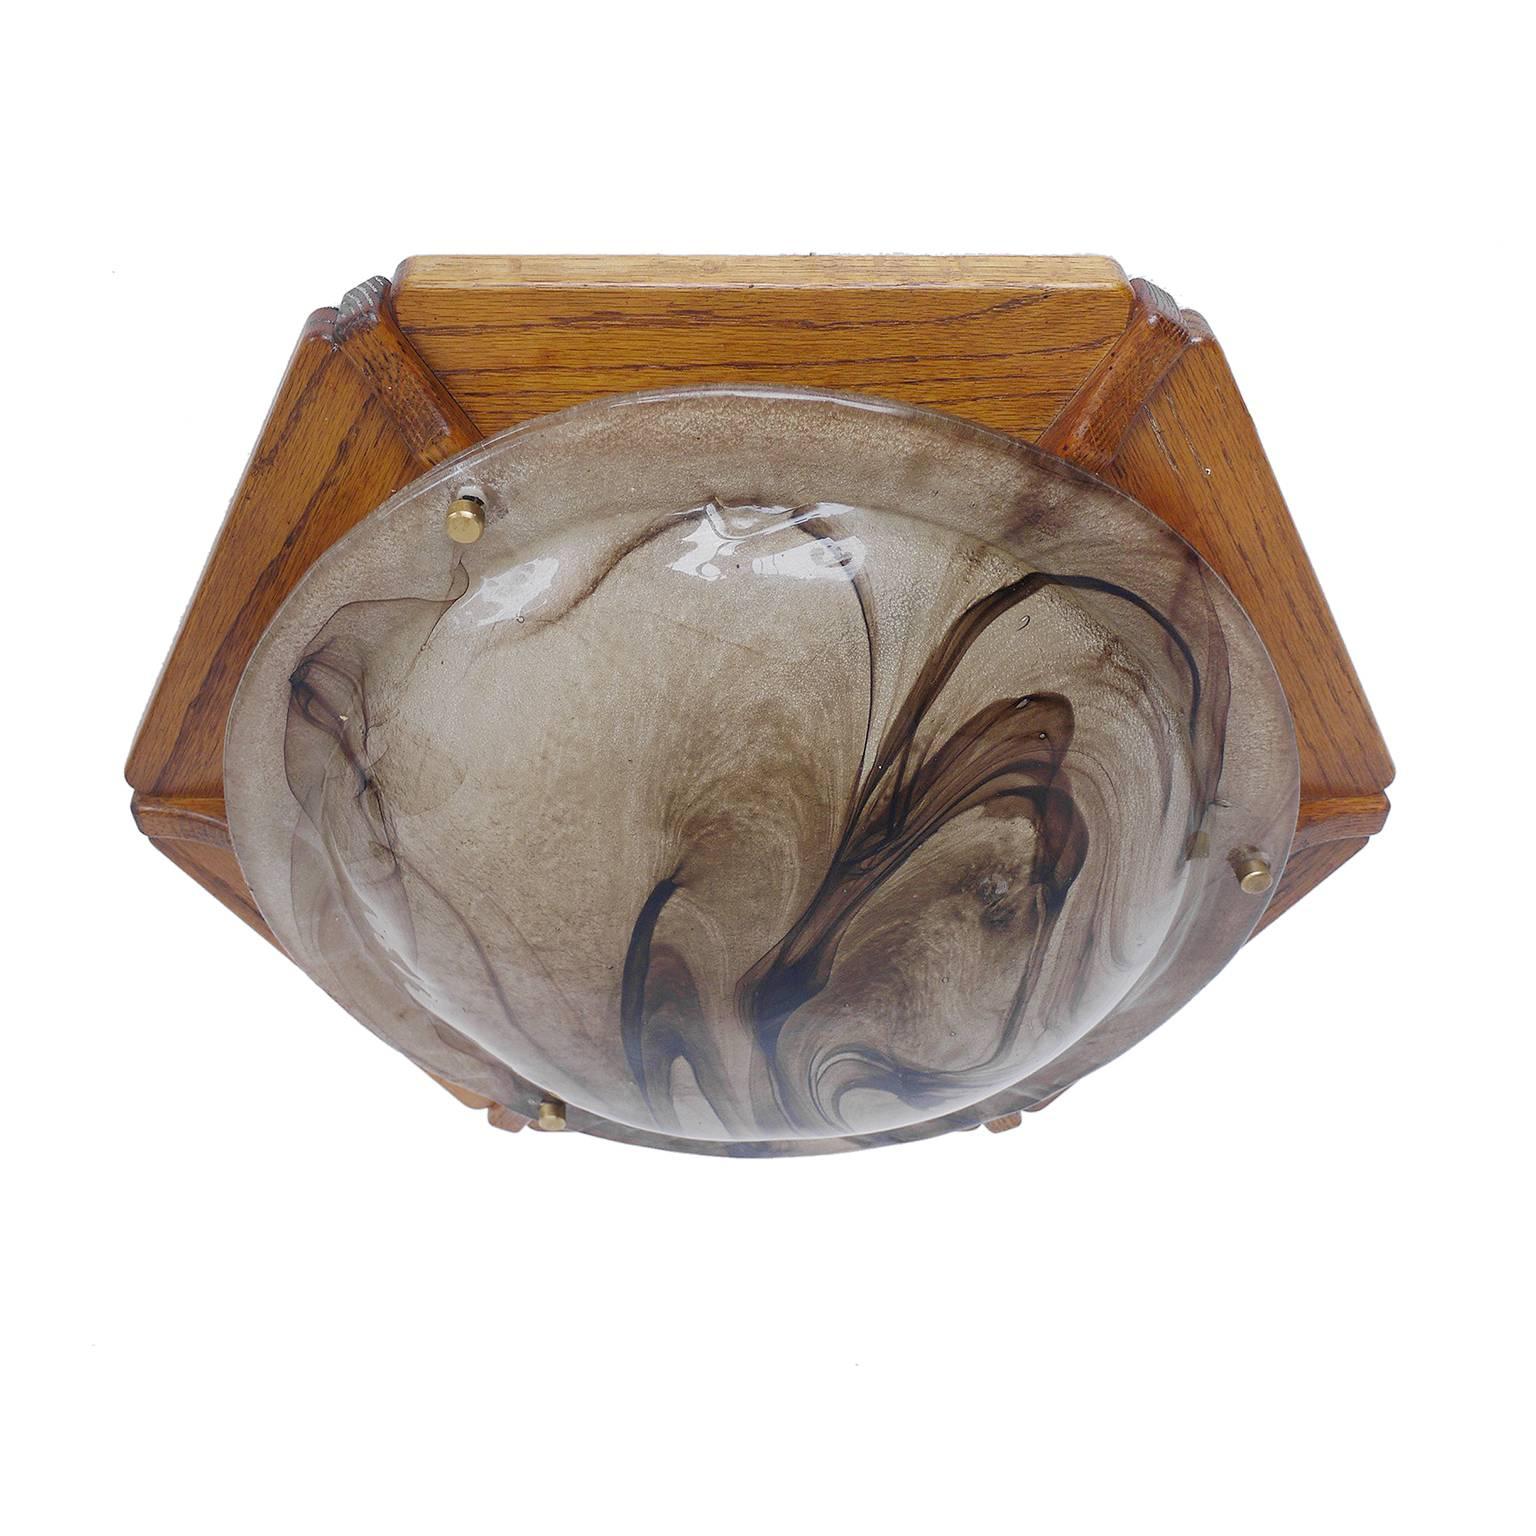 Elegant flush mount ceiling light executed in Murano glass with brass finals on a wooden frame. Manufactured by Kaiser Lighting, Germany in the 1960s.

Materials: Murano glass, brass and wood.
Colors: amber, golden and brown.
Measures: height 5.52